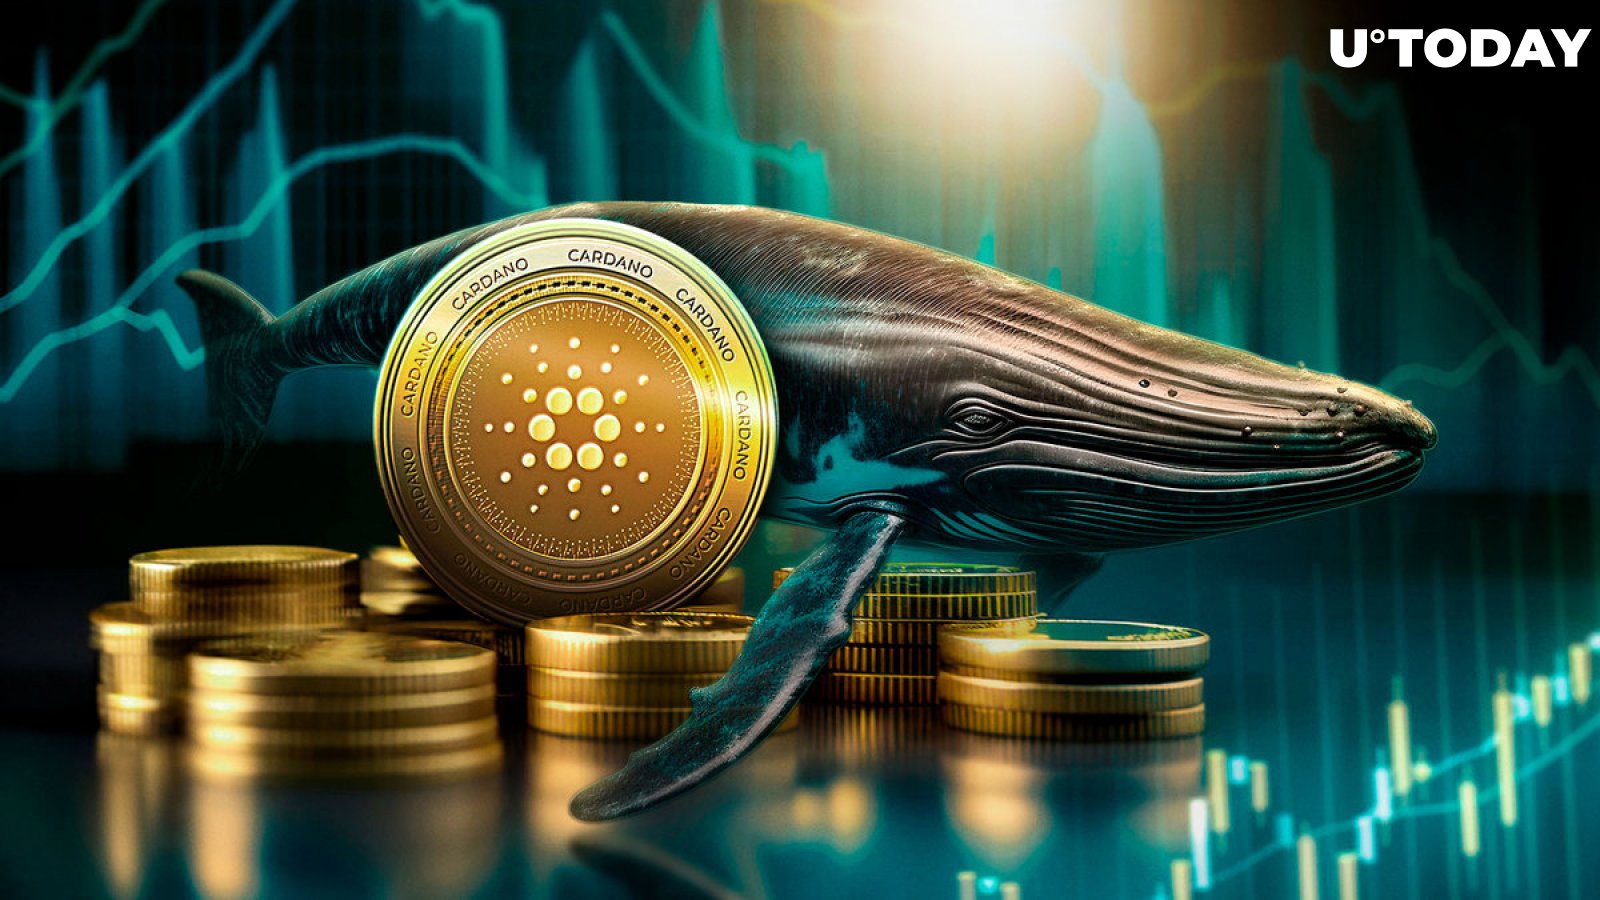 Cardano (ADA) Skyrockets 1,218% in Whale Inflows, What's Going On?